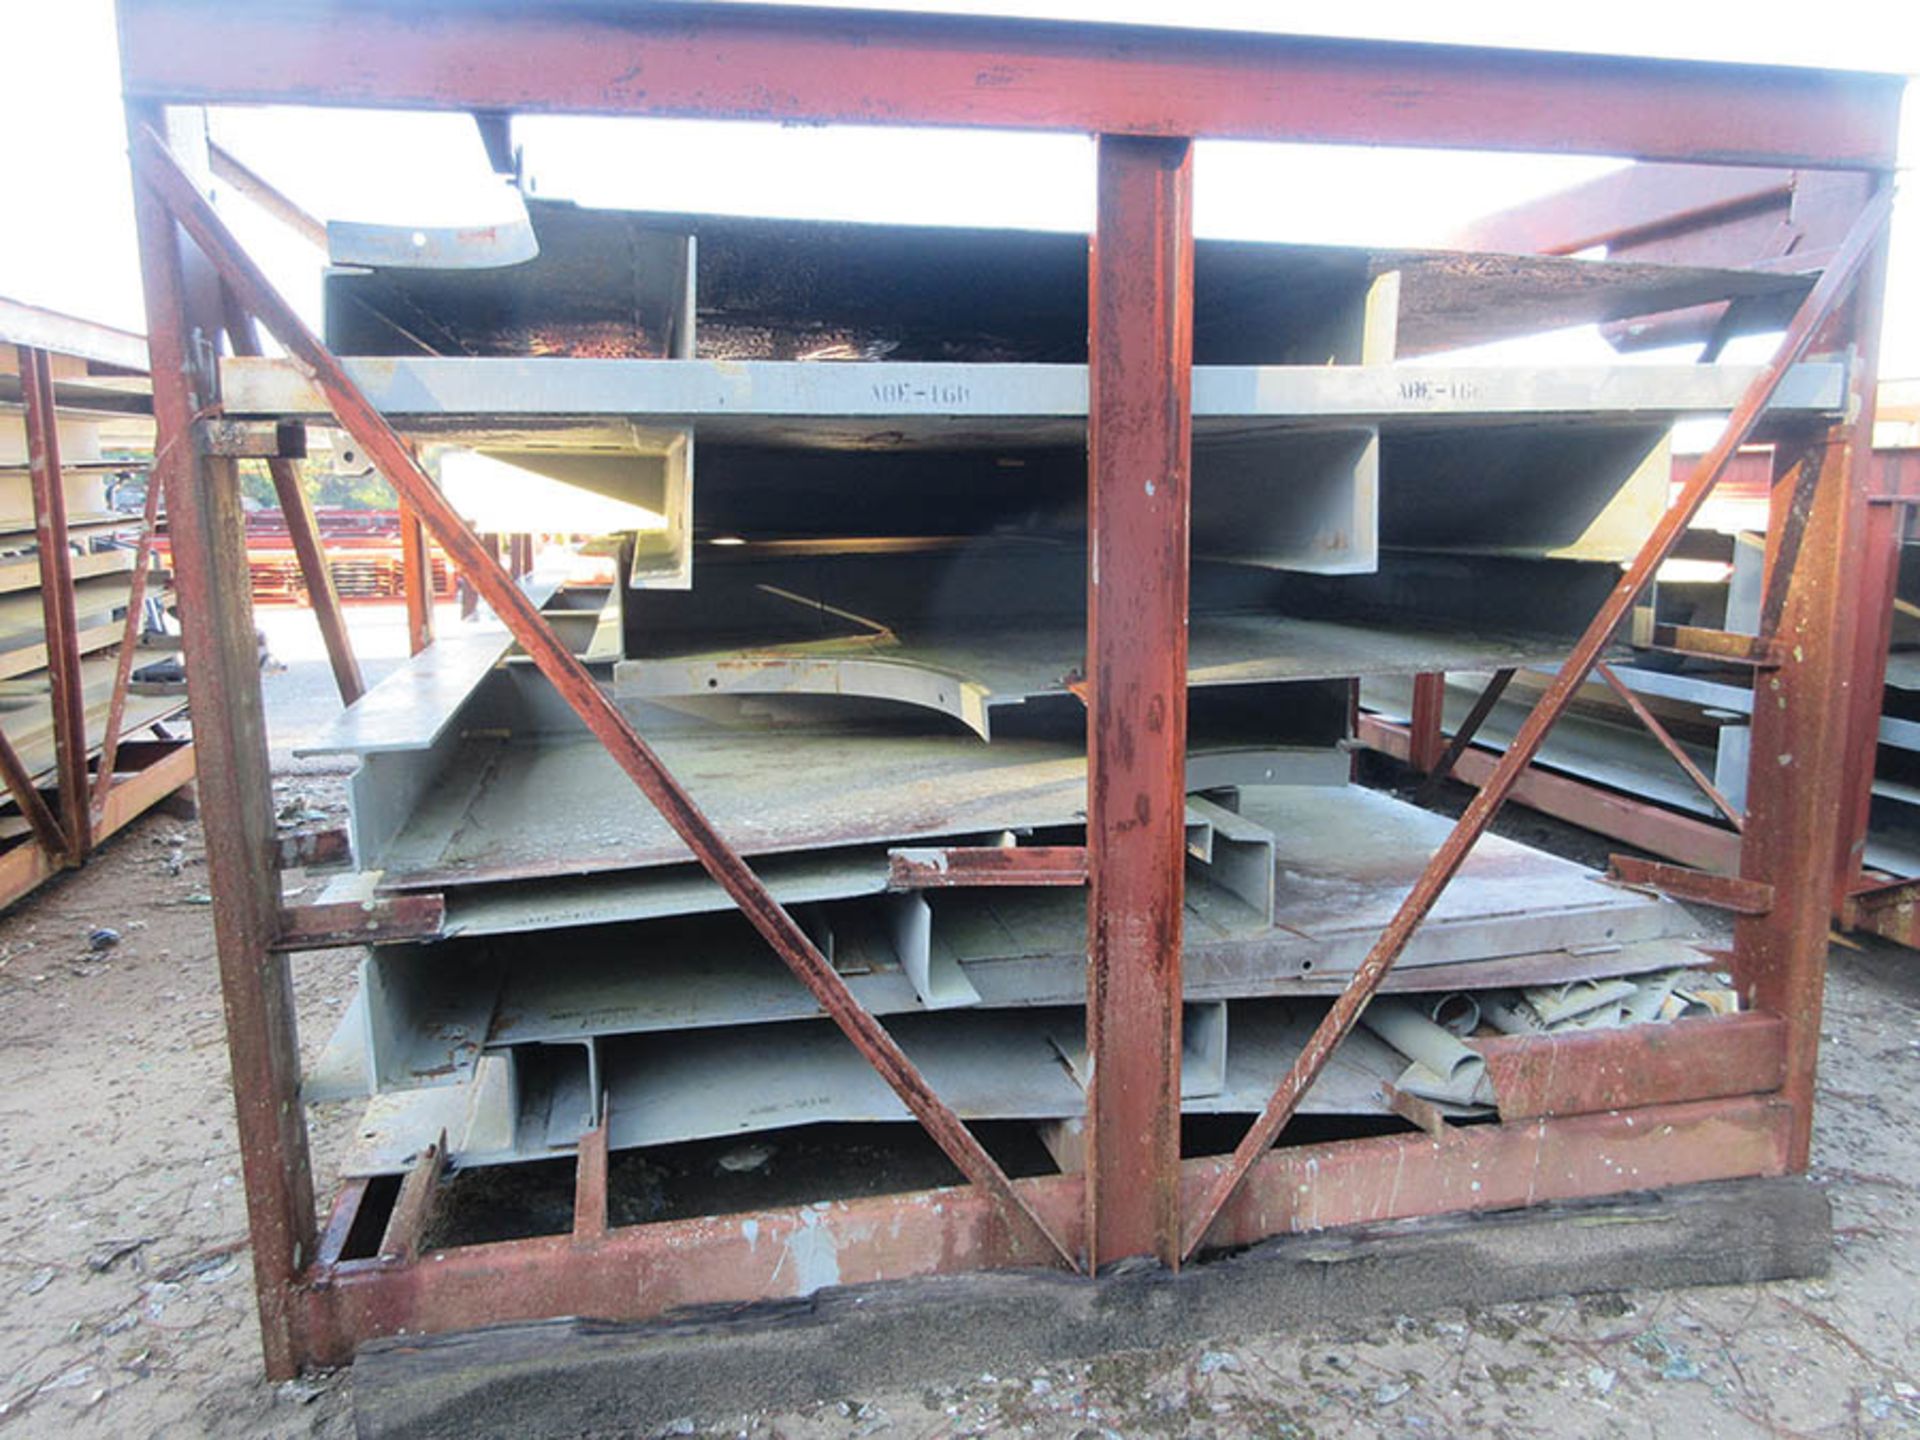 STRUCTURAL STEEL & DUCTING: DUCTING DIMENSIONS UP TO 388'' X 88'' X 87'' - Image 12 of 12